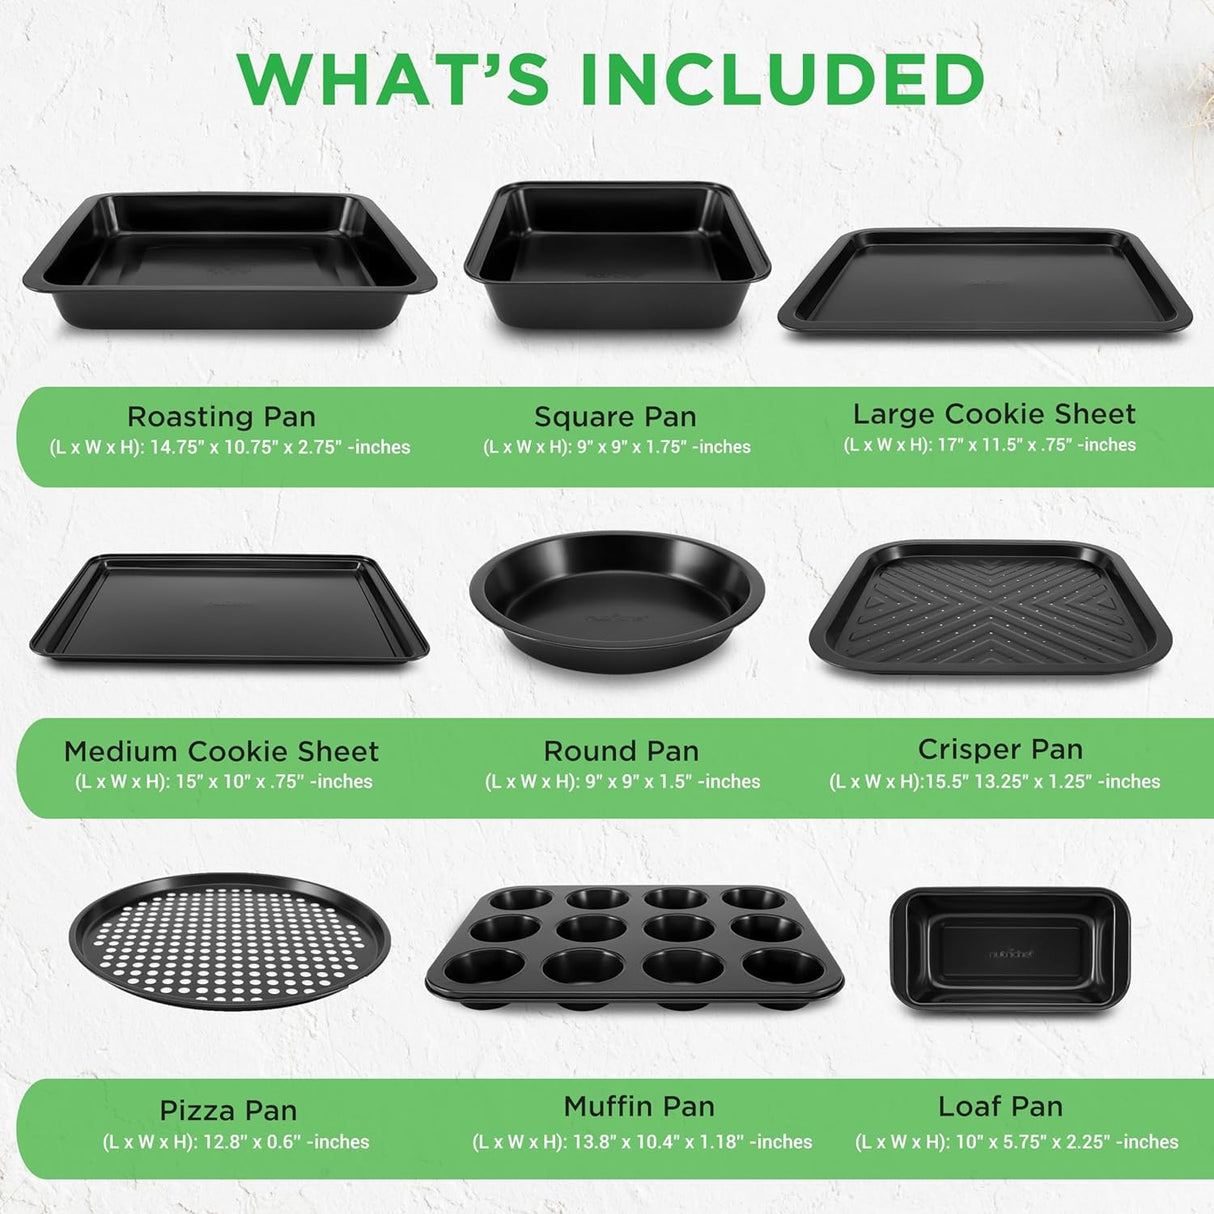 NutriChef 10-Piece Non-Stick Baking Pans Set - Deluxe Carbon Steel Bakeware Set w/ Cookie Sheets, Muffin Pan, Roasting Pan, Cake Pan, Baking Tray, Pizza Pan - Easy to Clean, Black